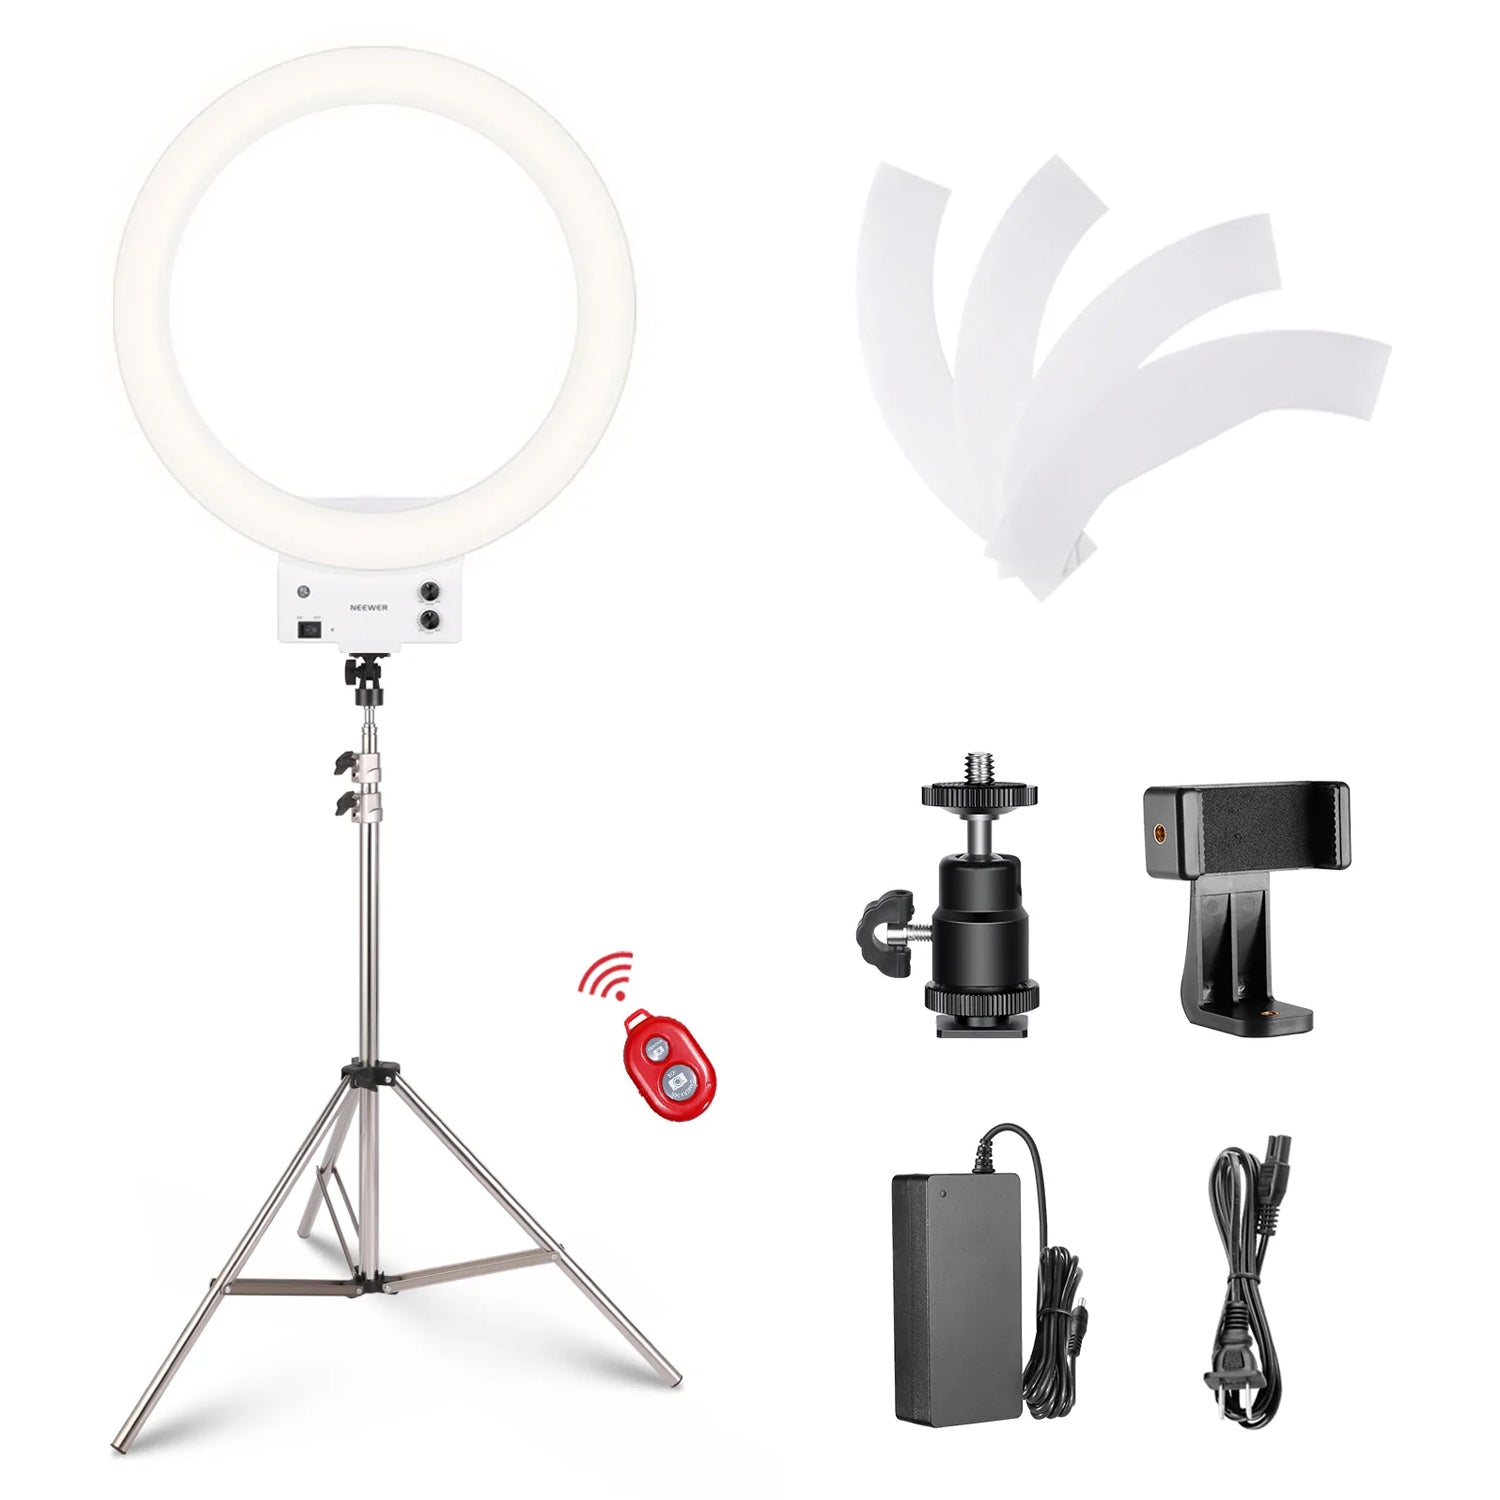 Ring Light, Up to 50% Off On Sale, Photographic LED Light